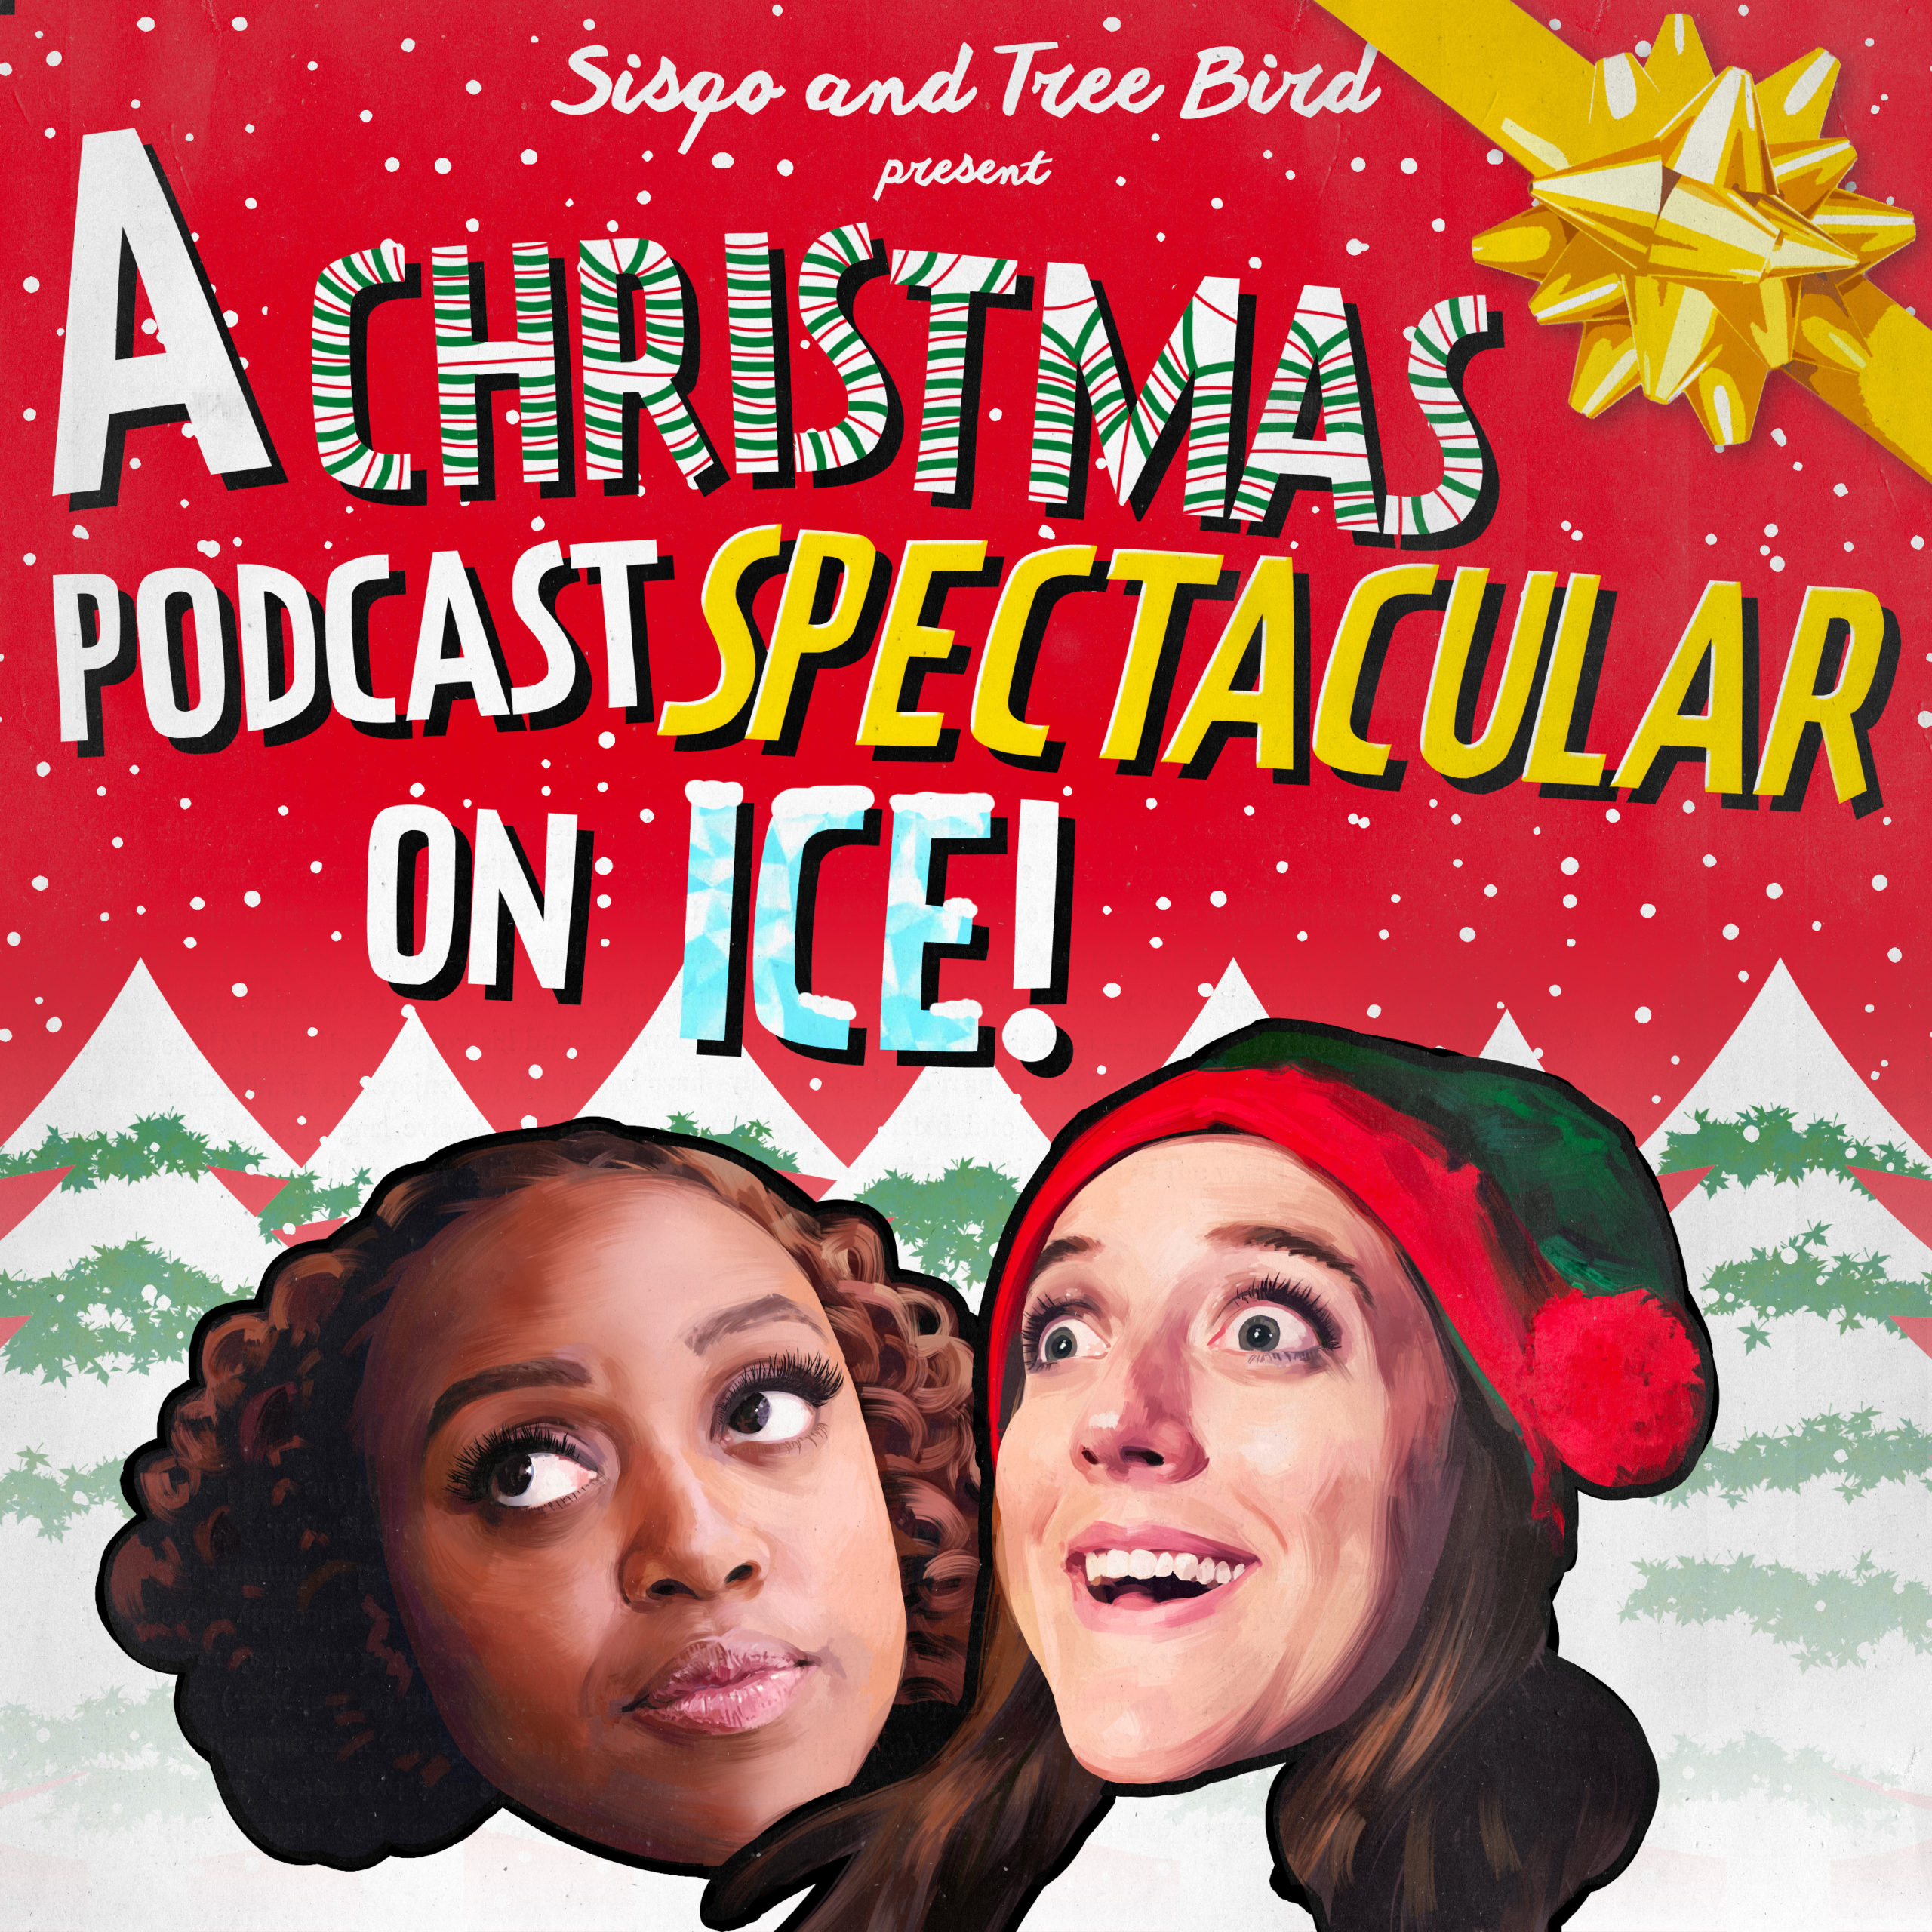 A Christmas Podcast Spectacular on Ice Podcast Cover - Square